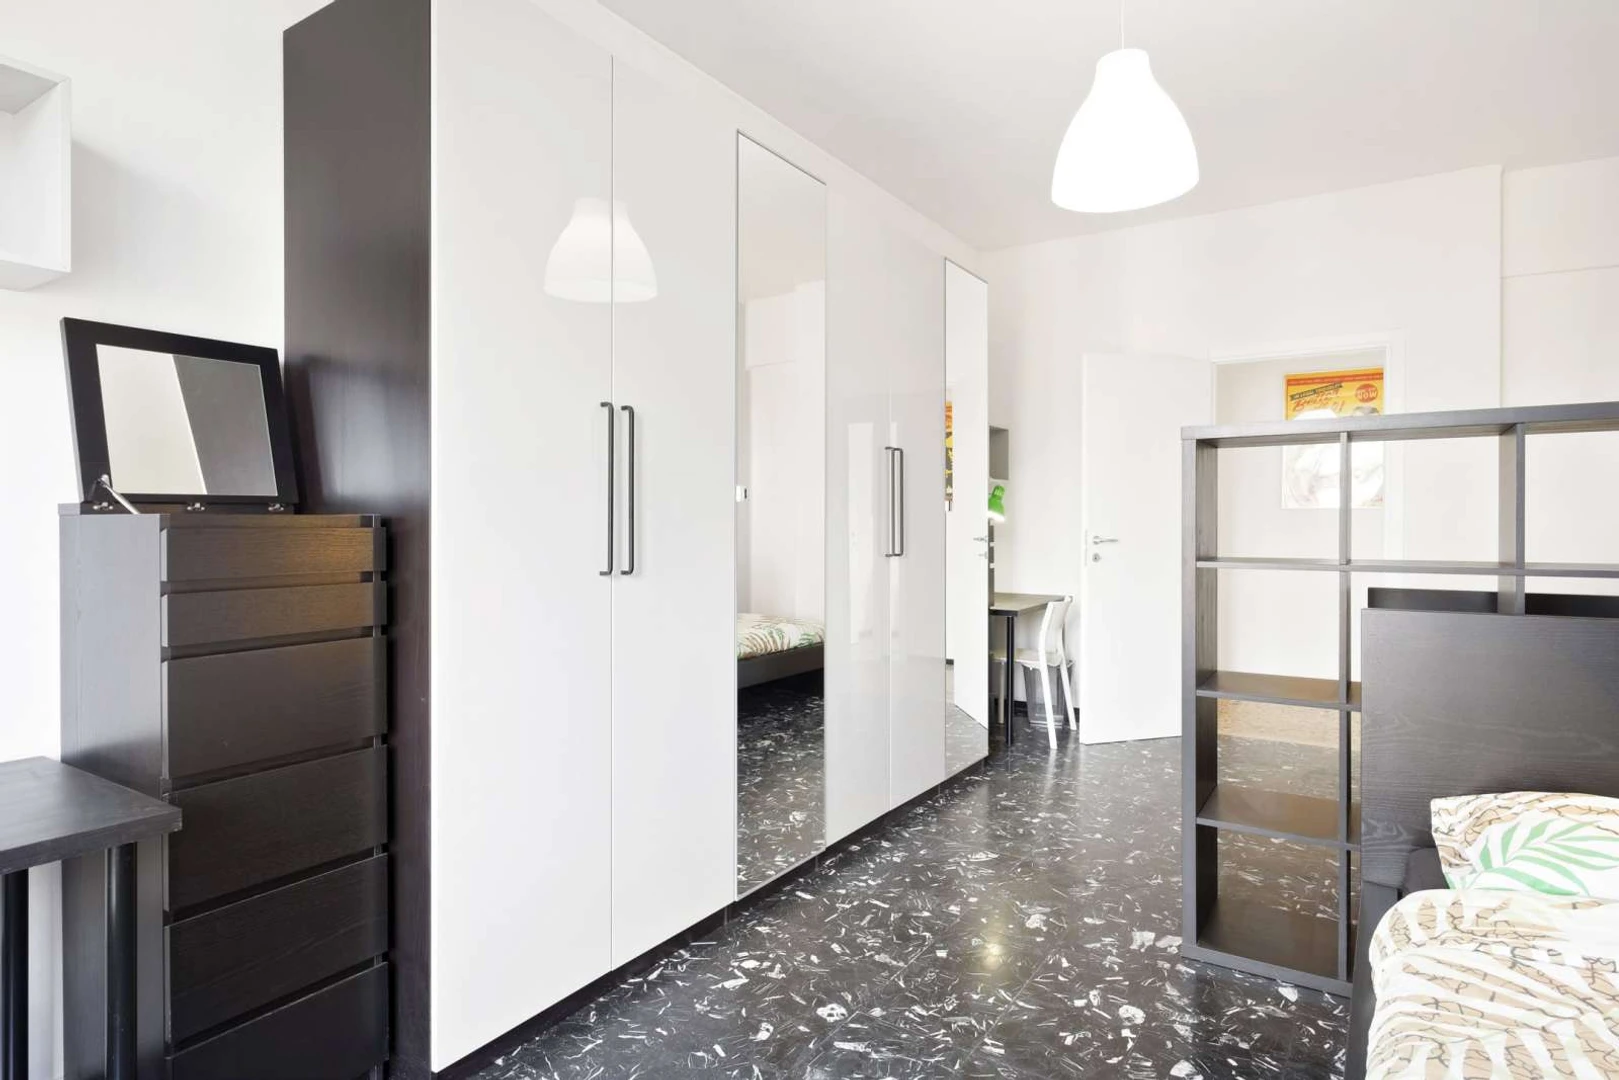 Renting rooms by the month in milano